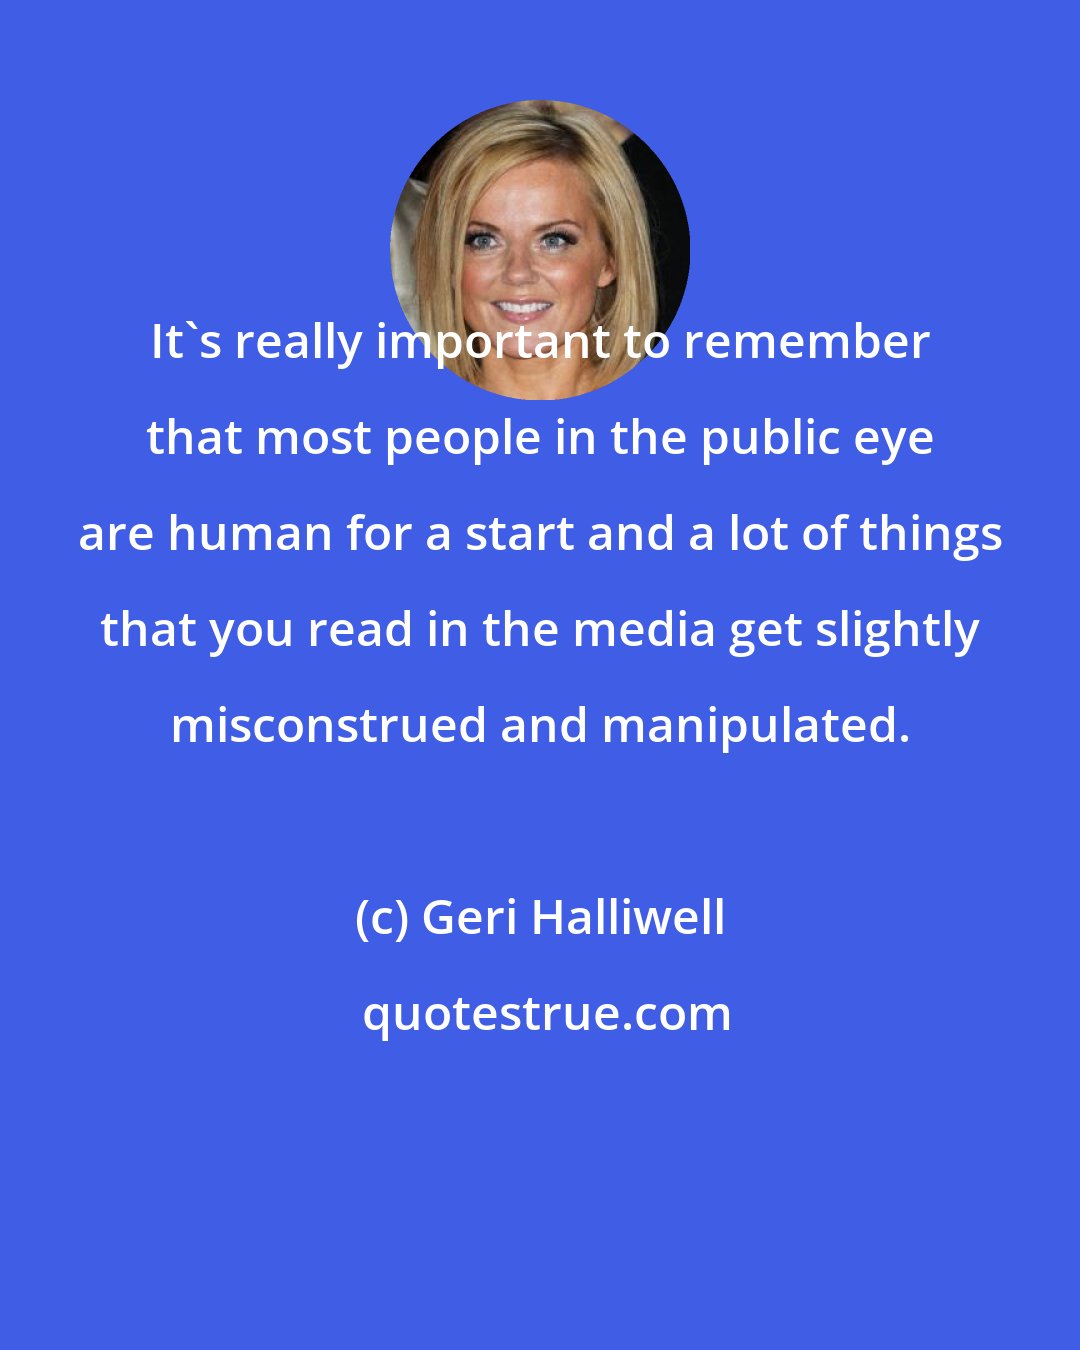 Geri Halliwell: It's really important to remember that most people in the public eye are human for a start and a lot of things that you read in the media get slightly misconstrued and manipulated.